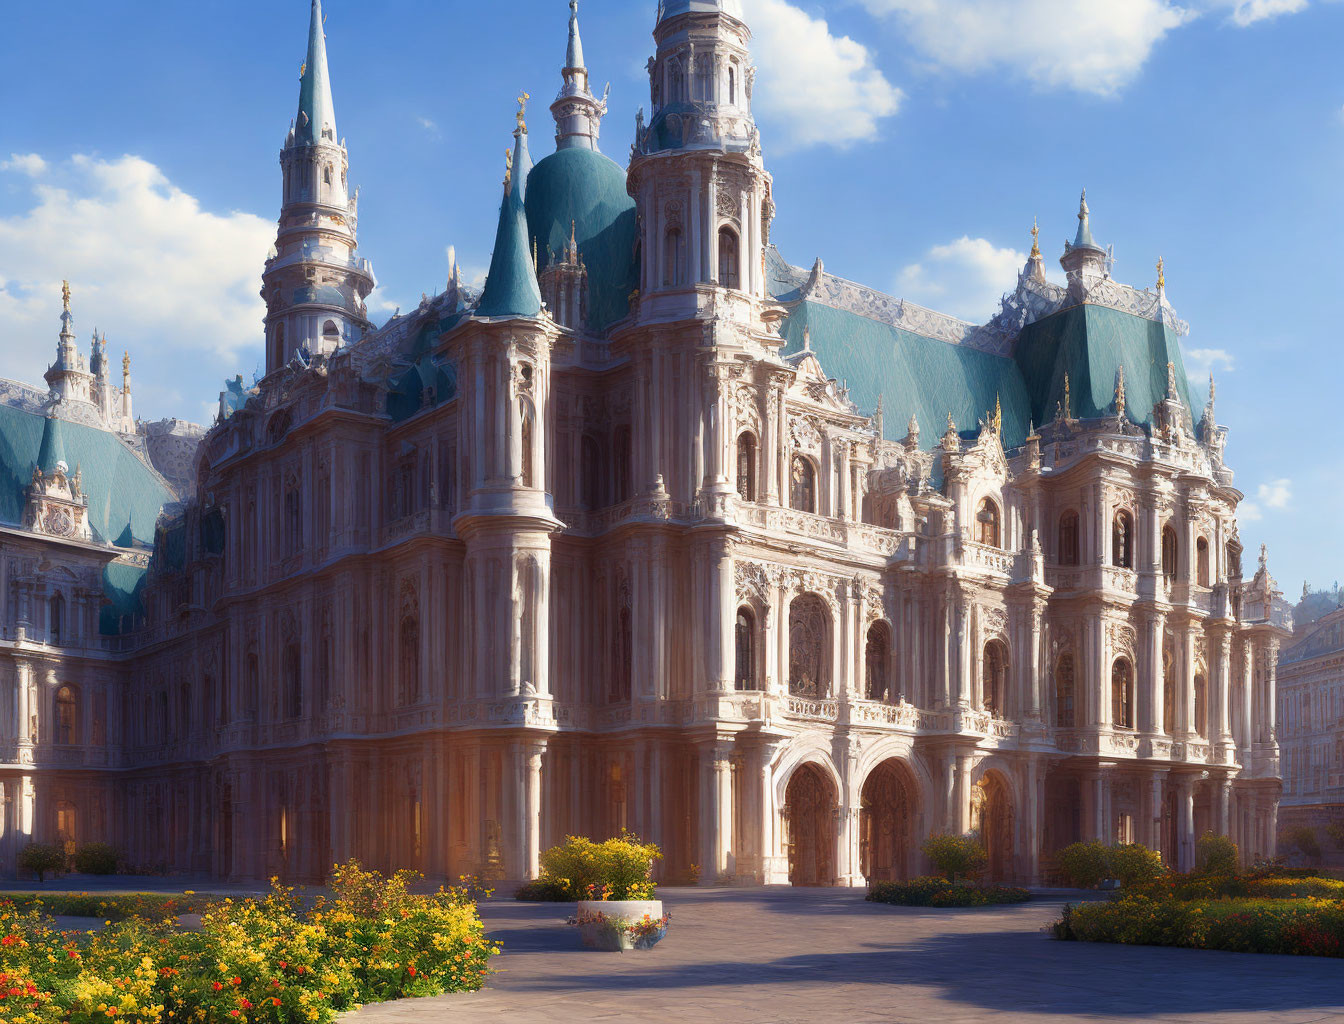 Baroque-style palace with spires and vibrant flowerbeds